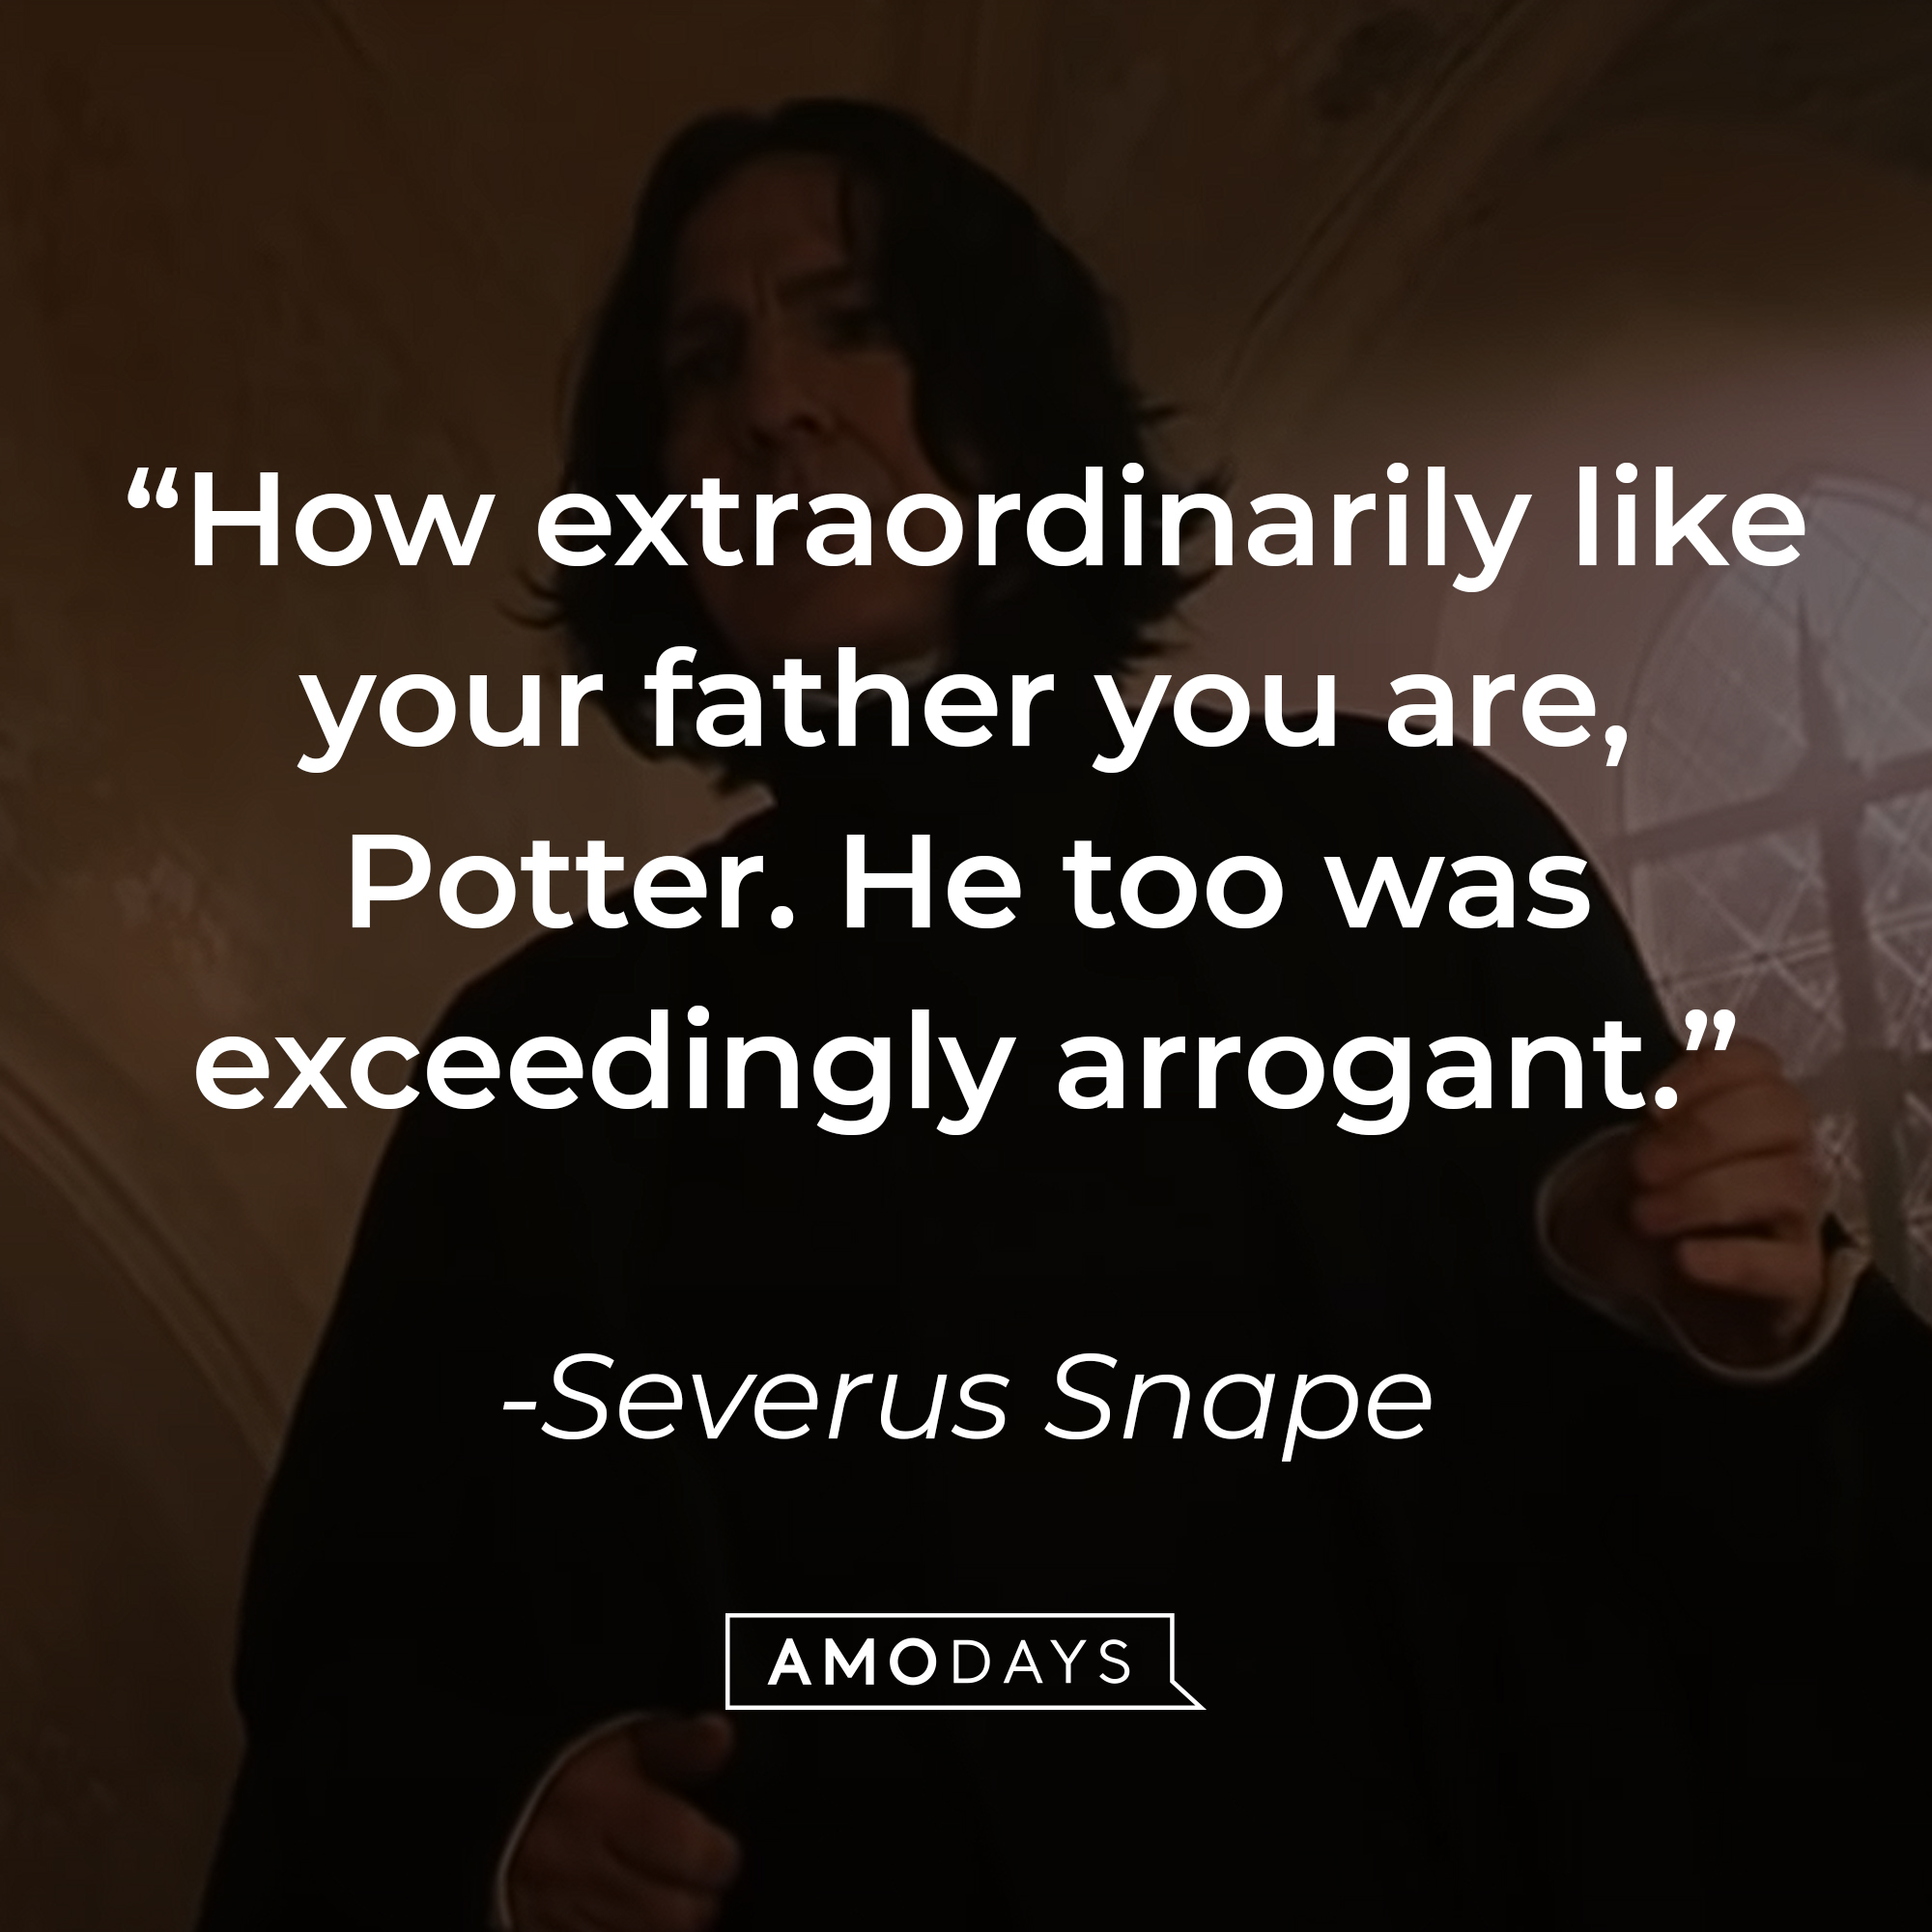 Severus Snape's quote: "How extraordinary like your father you are, Potter. He too was exceedingly arrogant." | Source: YouTube/harrypotter